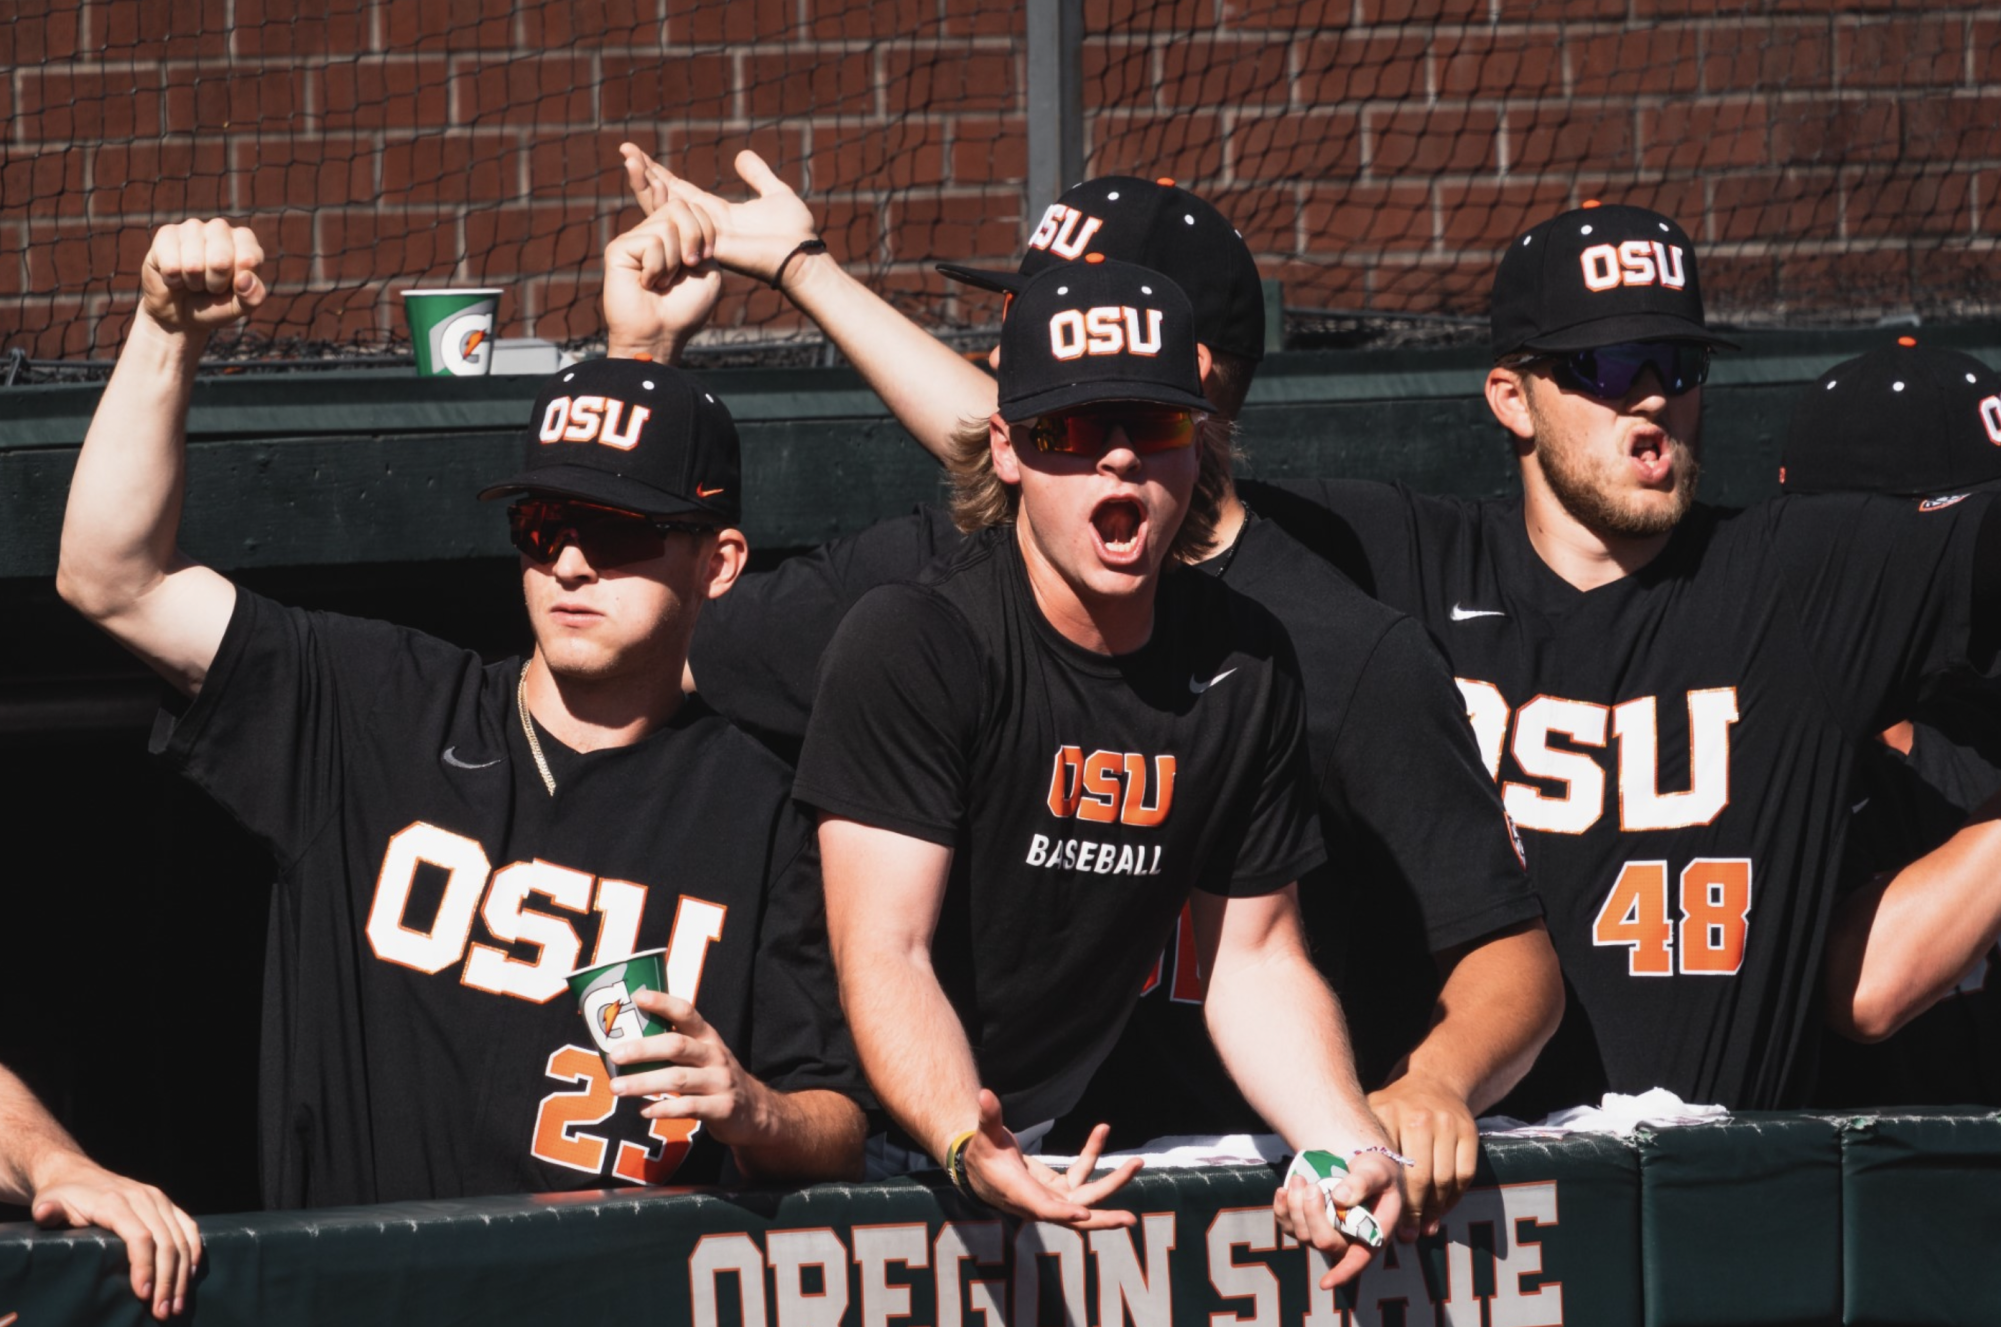 The Oregon State bench cheers on the team against the Arizona Wildcats at Goss Stadium in Corvallis on Saturday. The Beavers won the second game of the series, 10-4.